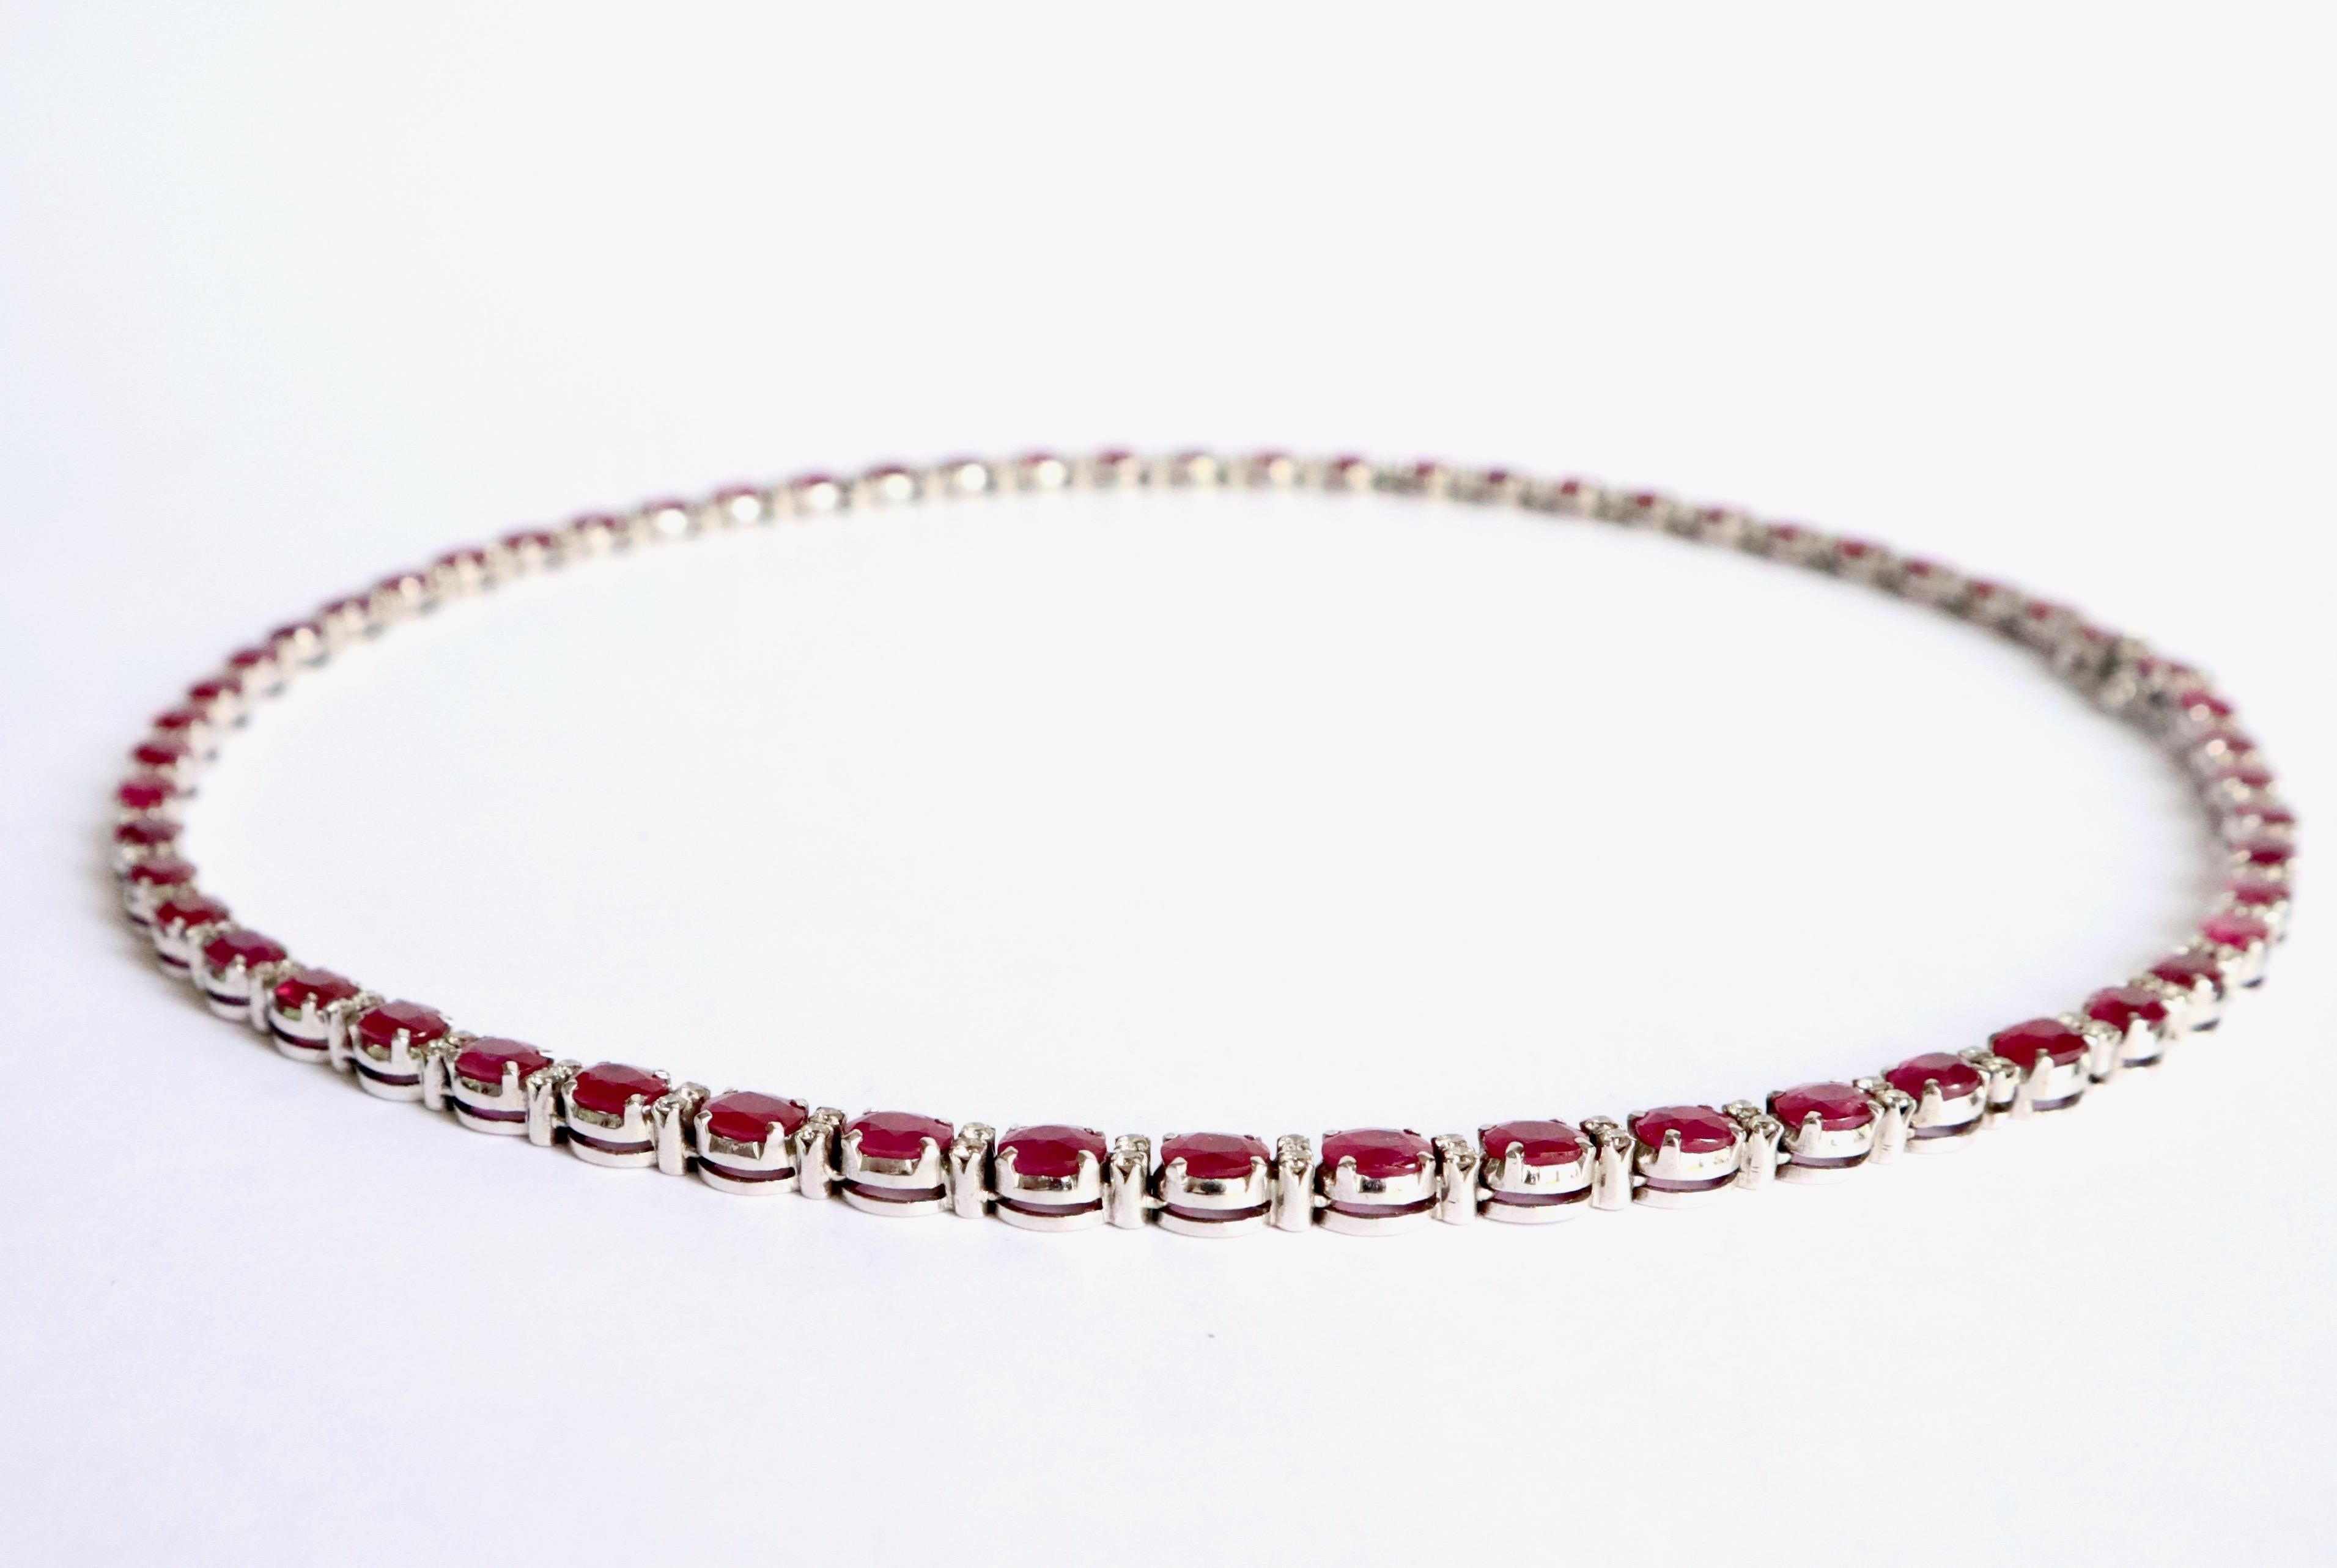 Women's Ruby Necklace Choker in 18 Carat 18 Karat Gold 60 Rubies 25 Carats and Diamonds For Sale